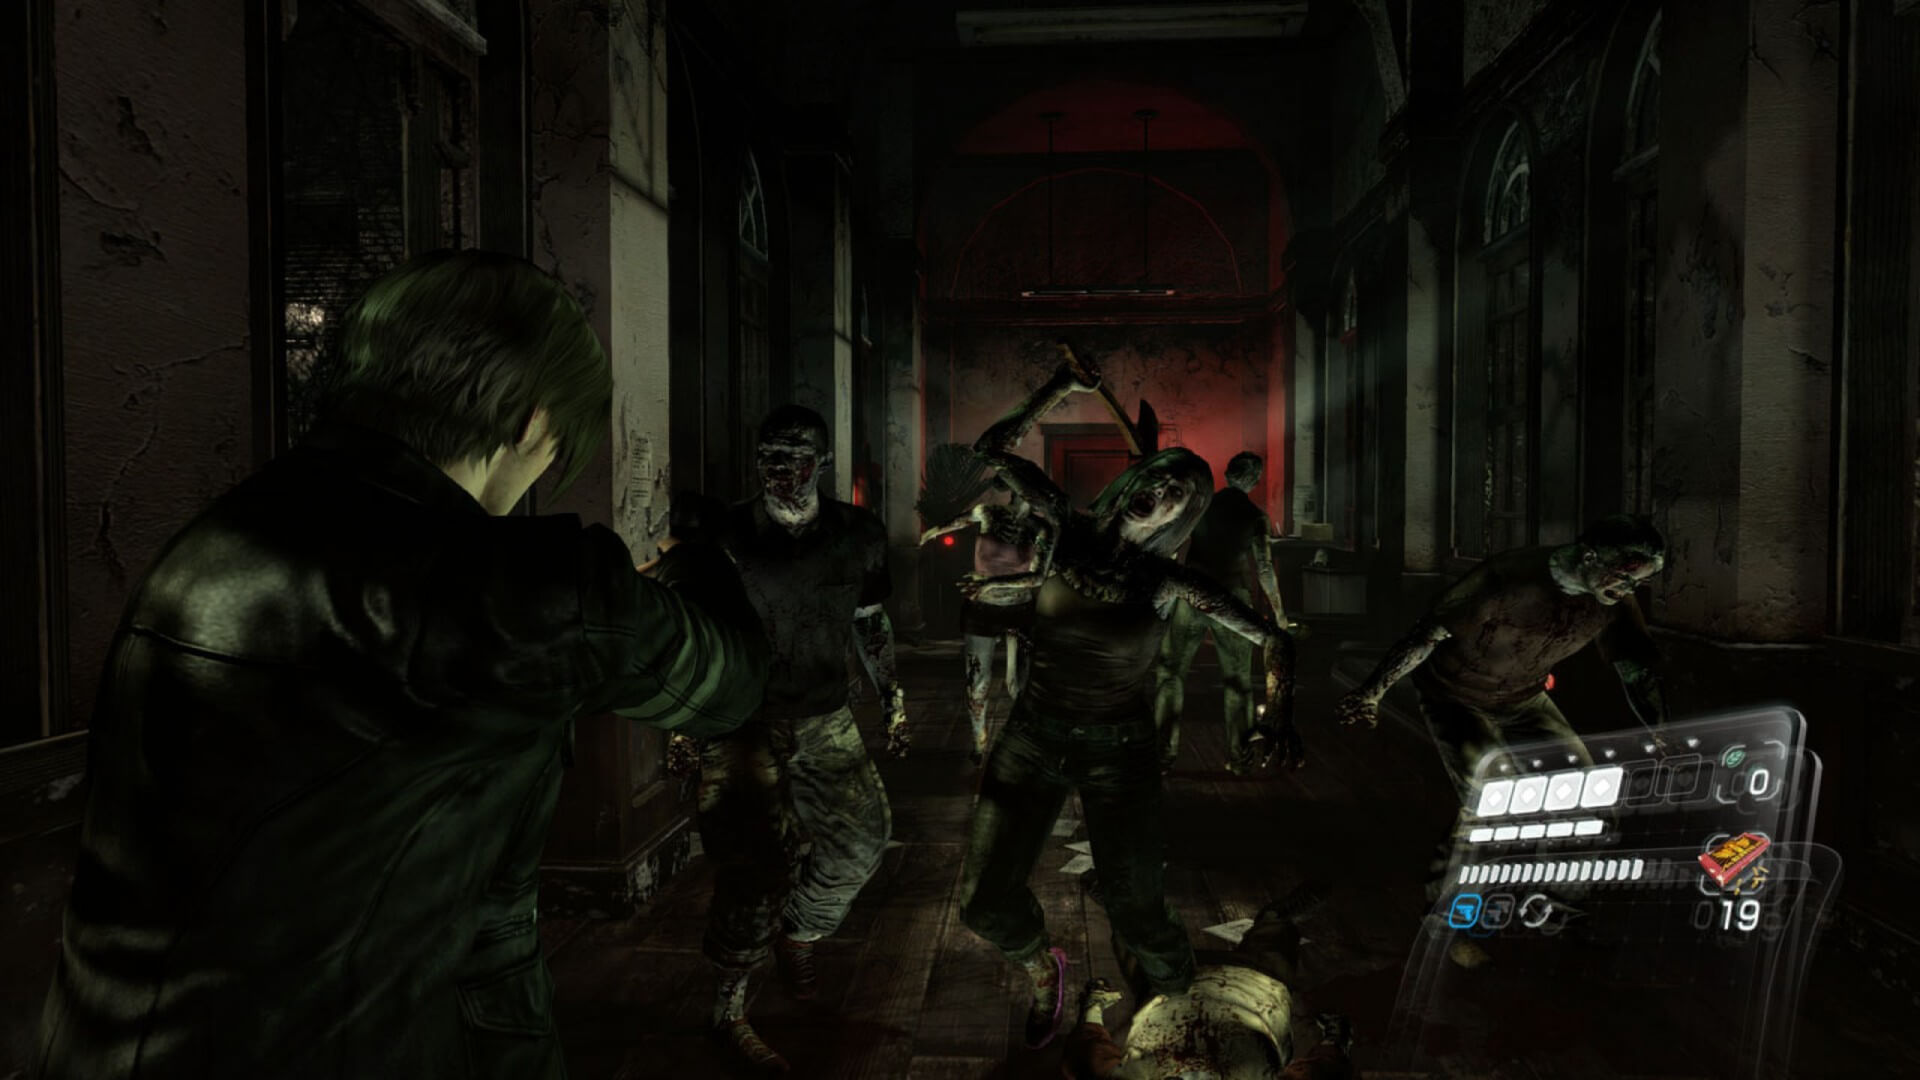 resident evil 6 system requirements